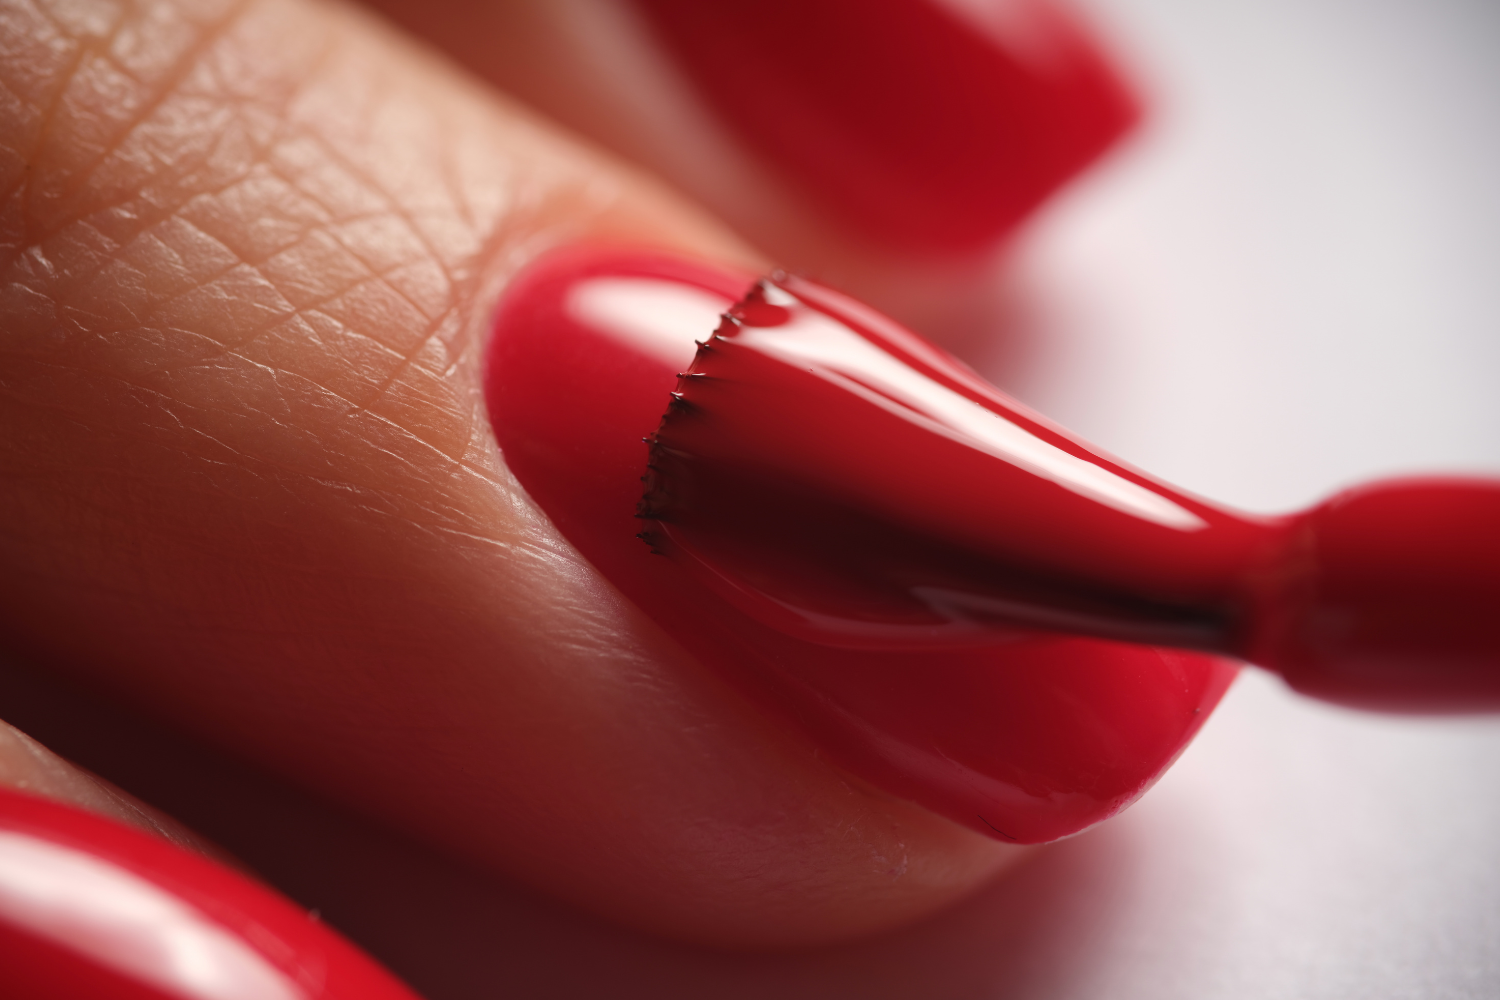 Need You Nail Polish to Dry Fast? Follow These Great Tips